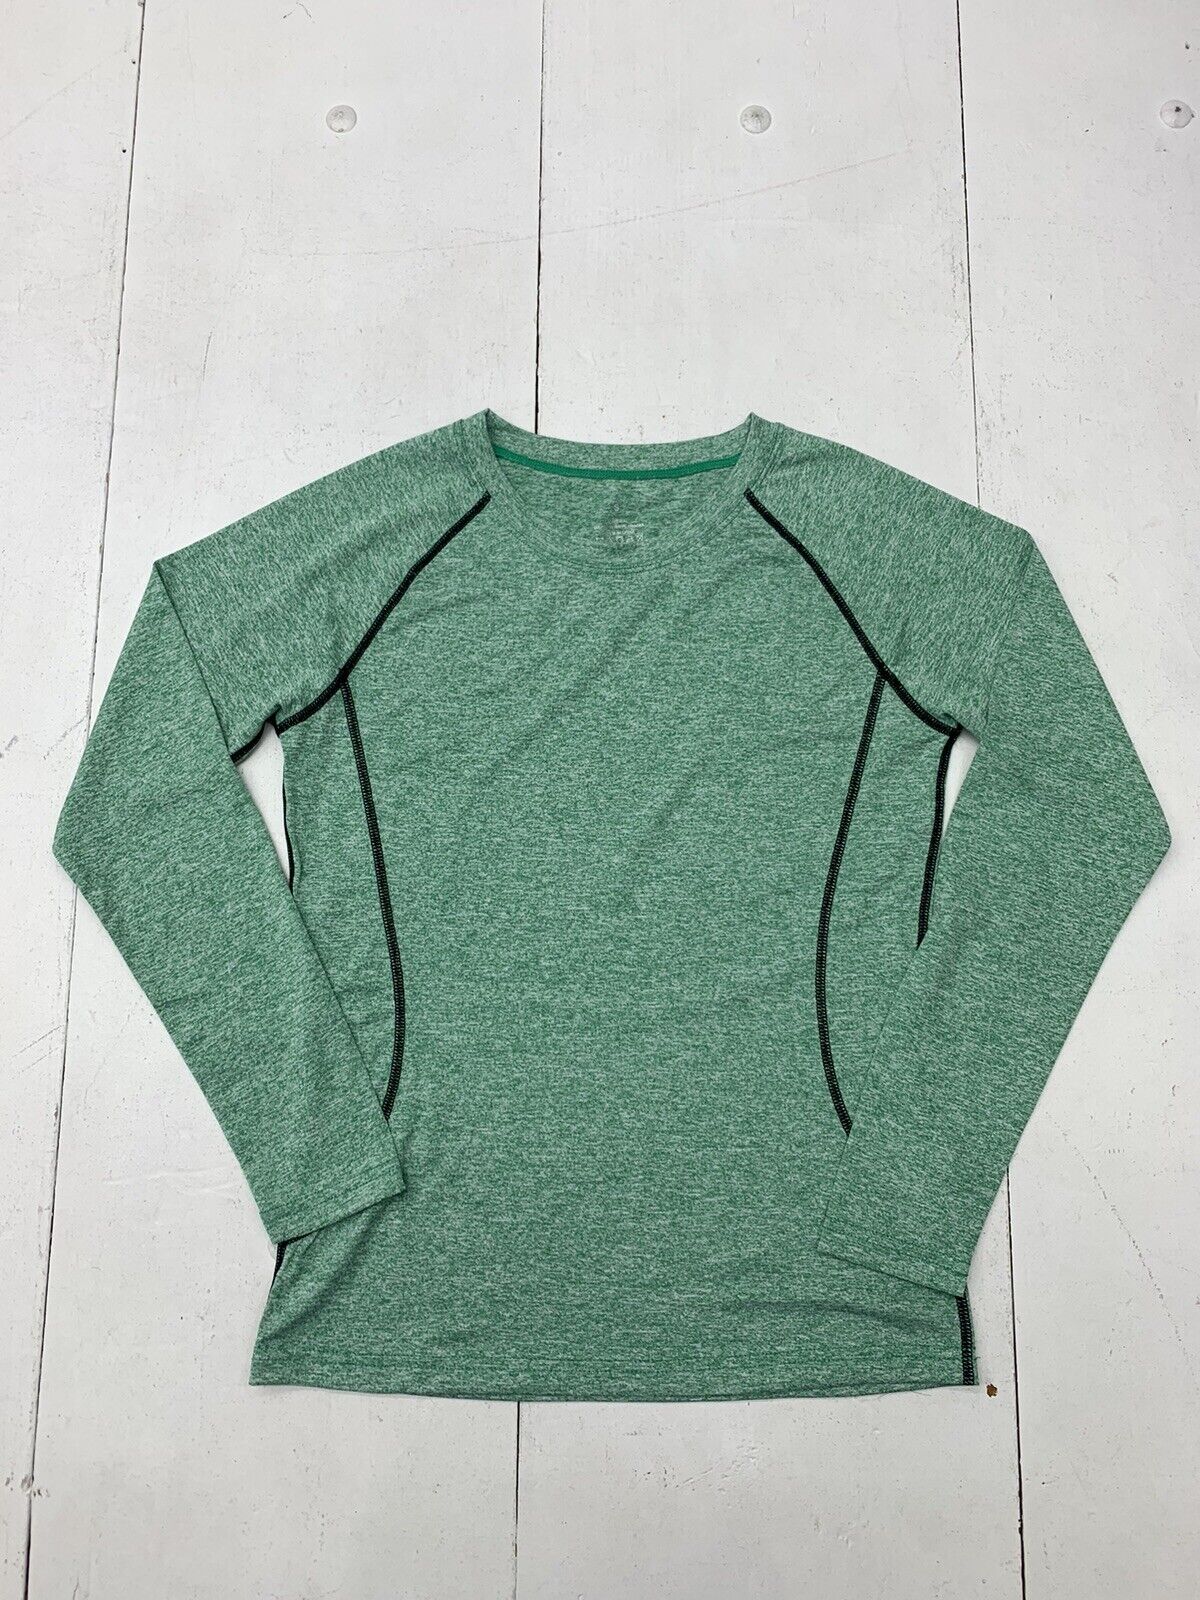 Unbranded Womens Green Athletic Long Sleeve Shirt Size Small - beyond  exchange